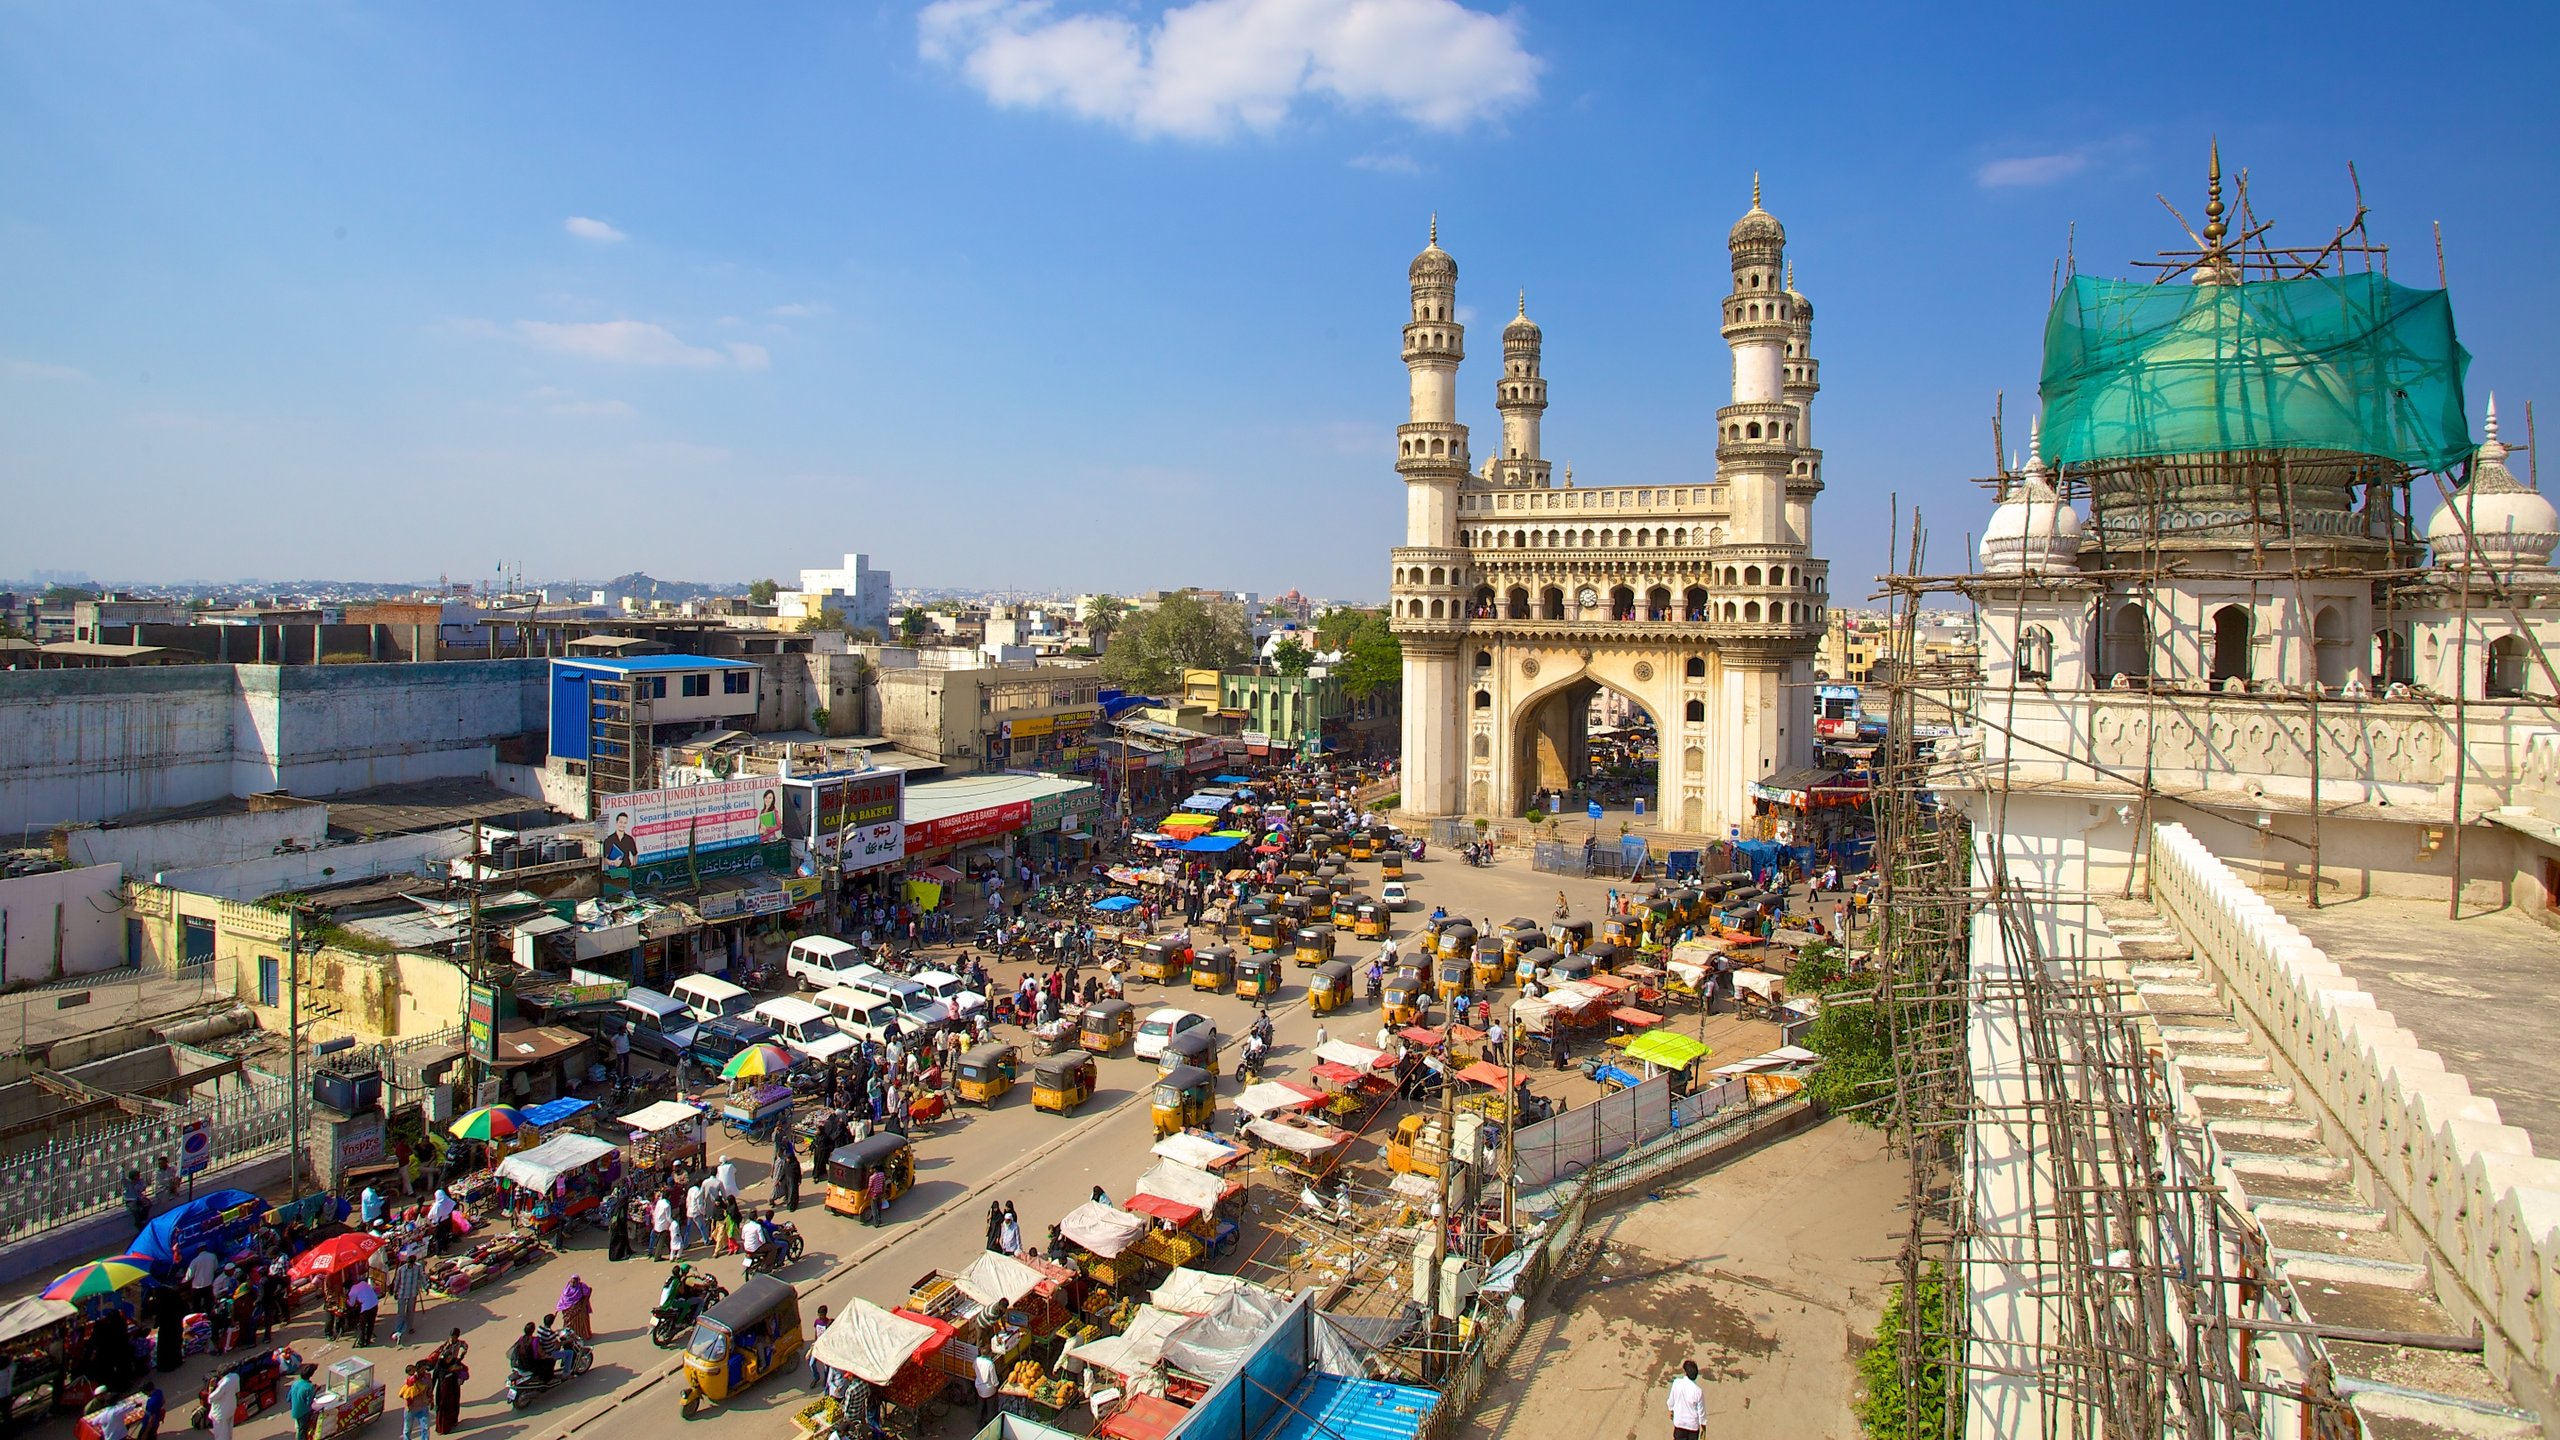 Hyderabad is India’s Third most impacted city in terms of loss of